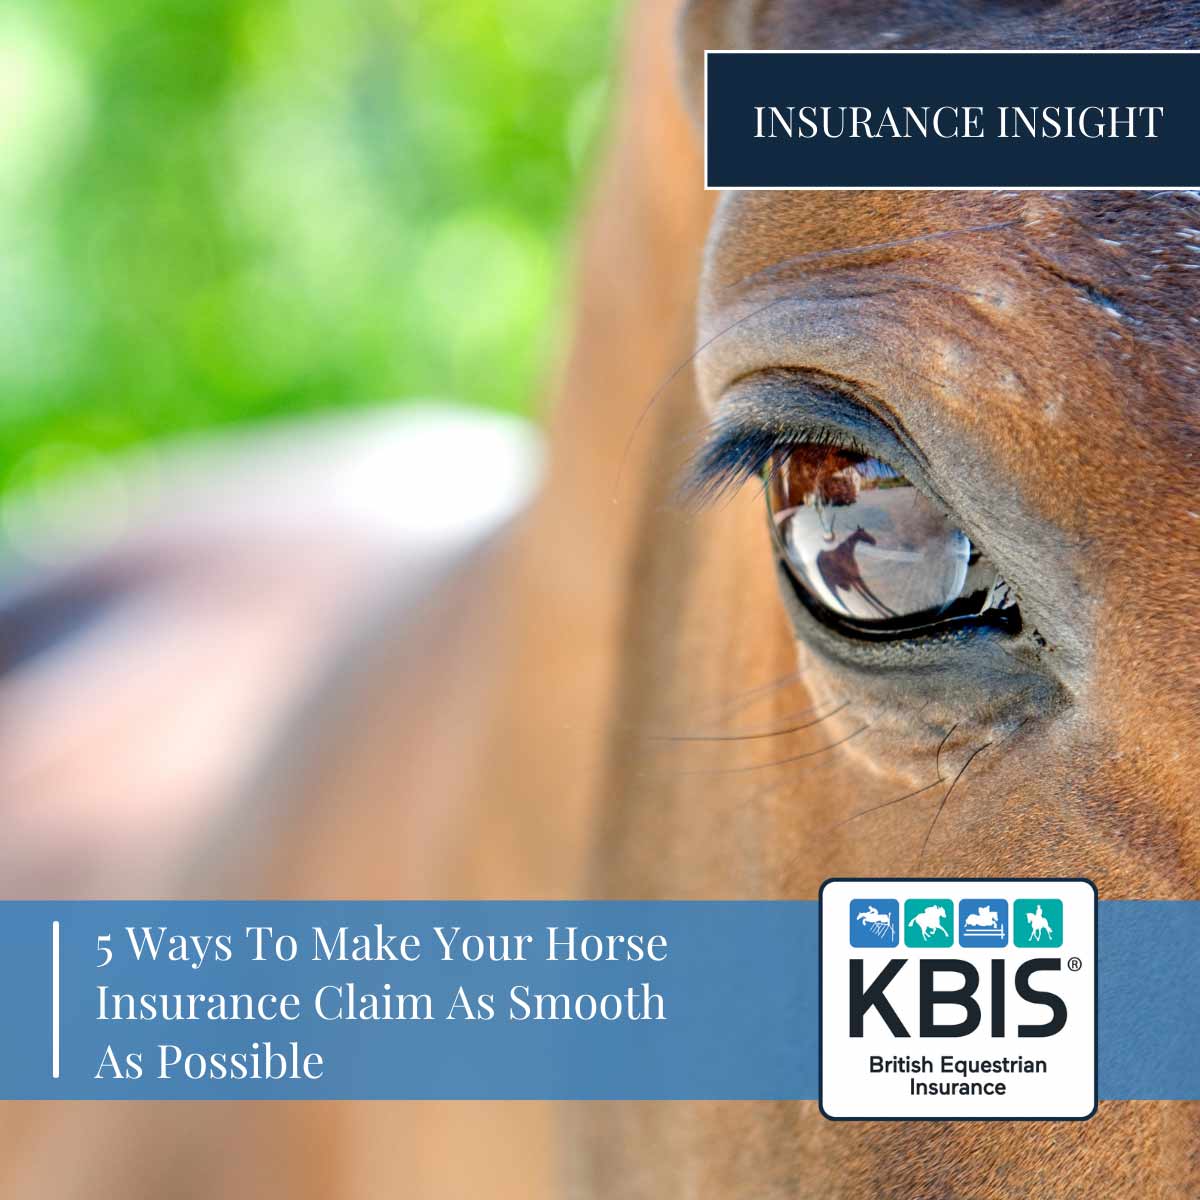 Horse Insurance from KBIS British Equestrian Insurance